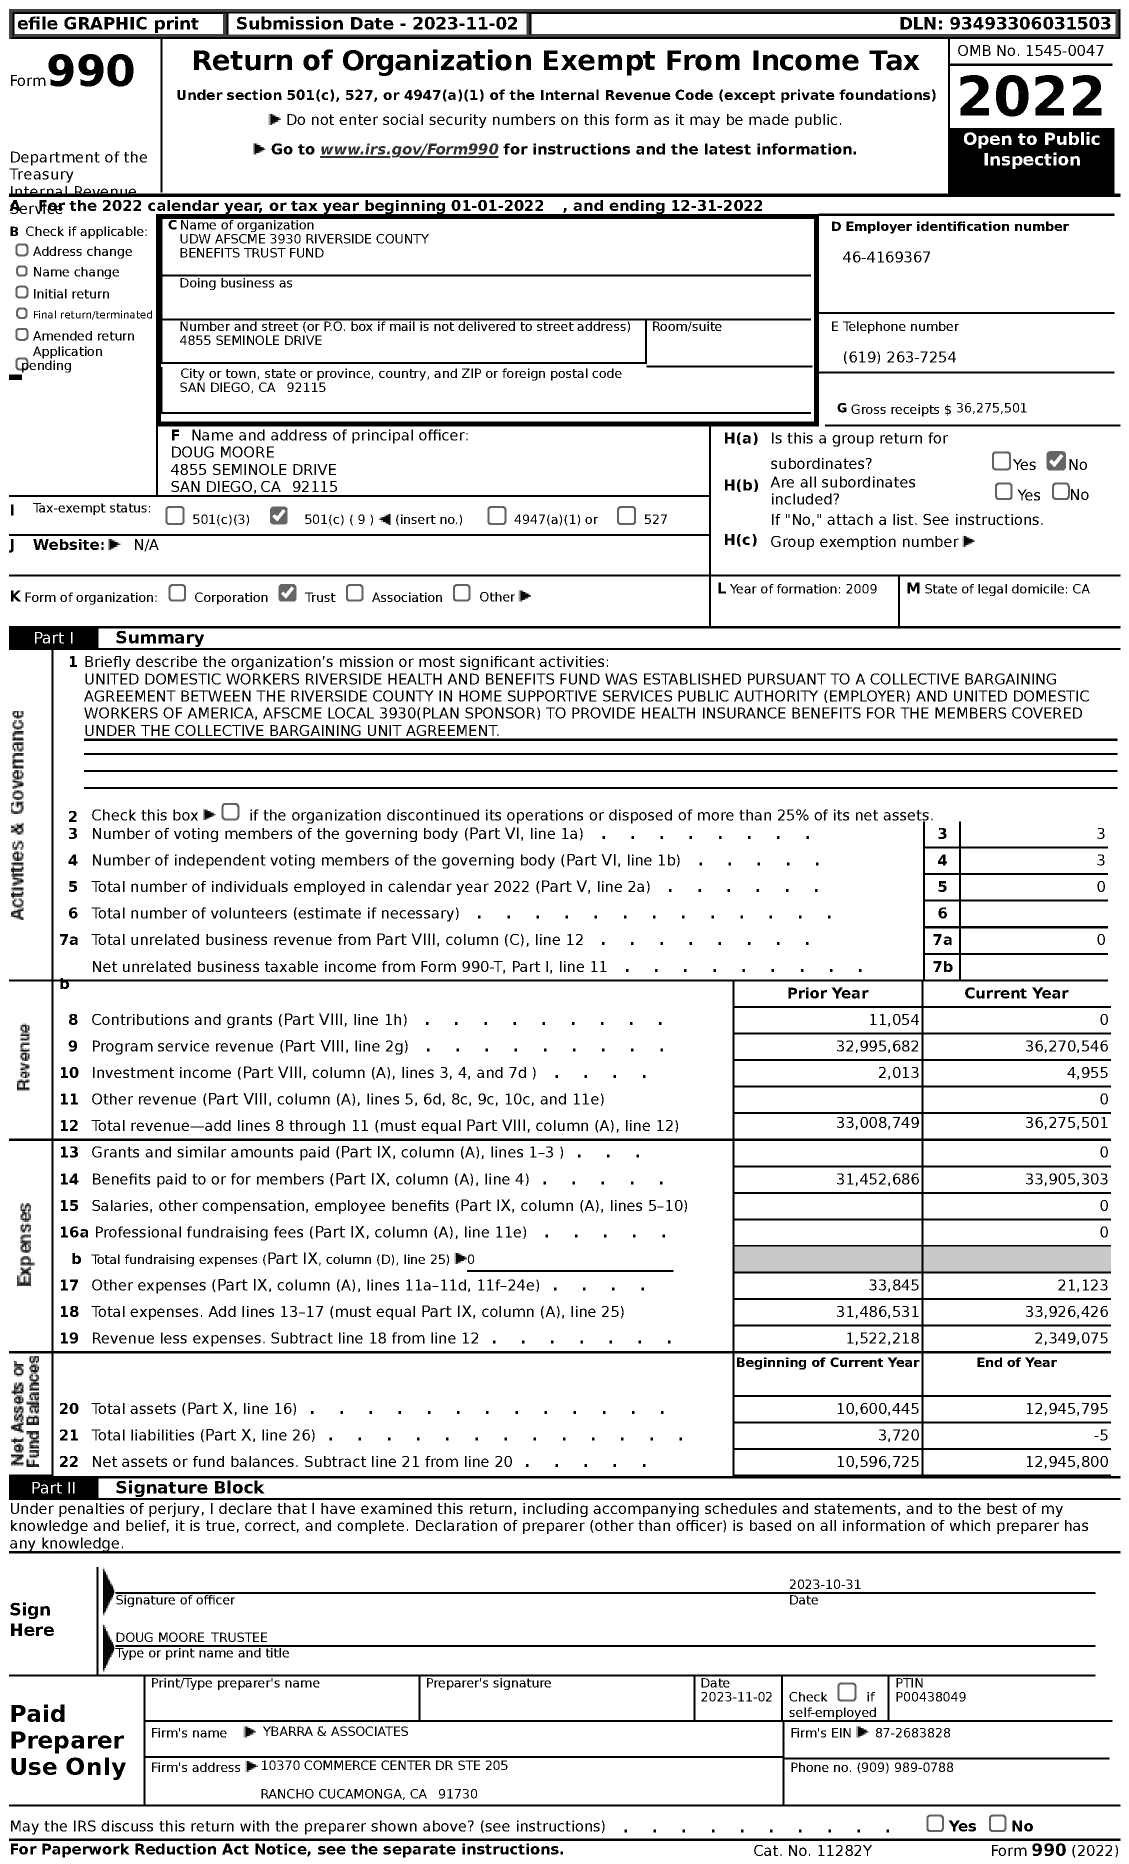 Image of first page of 2022 Form 990 for Udw AFSCME 3930 Riverside County Benefits Trust Fund